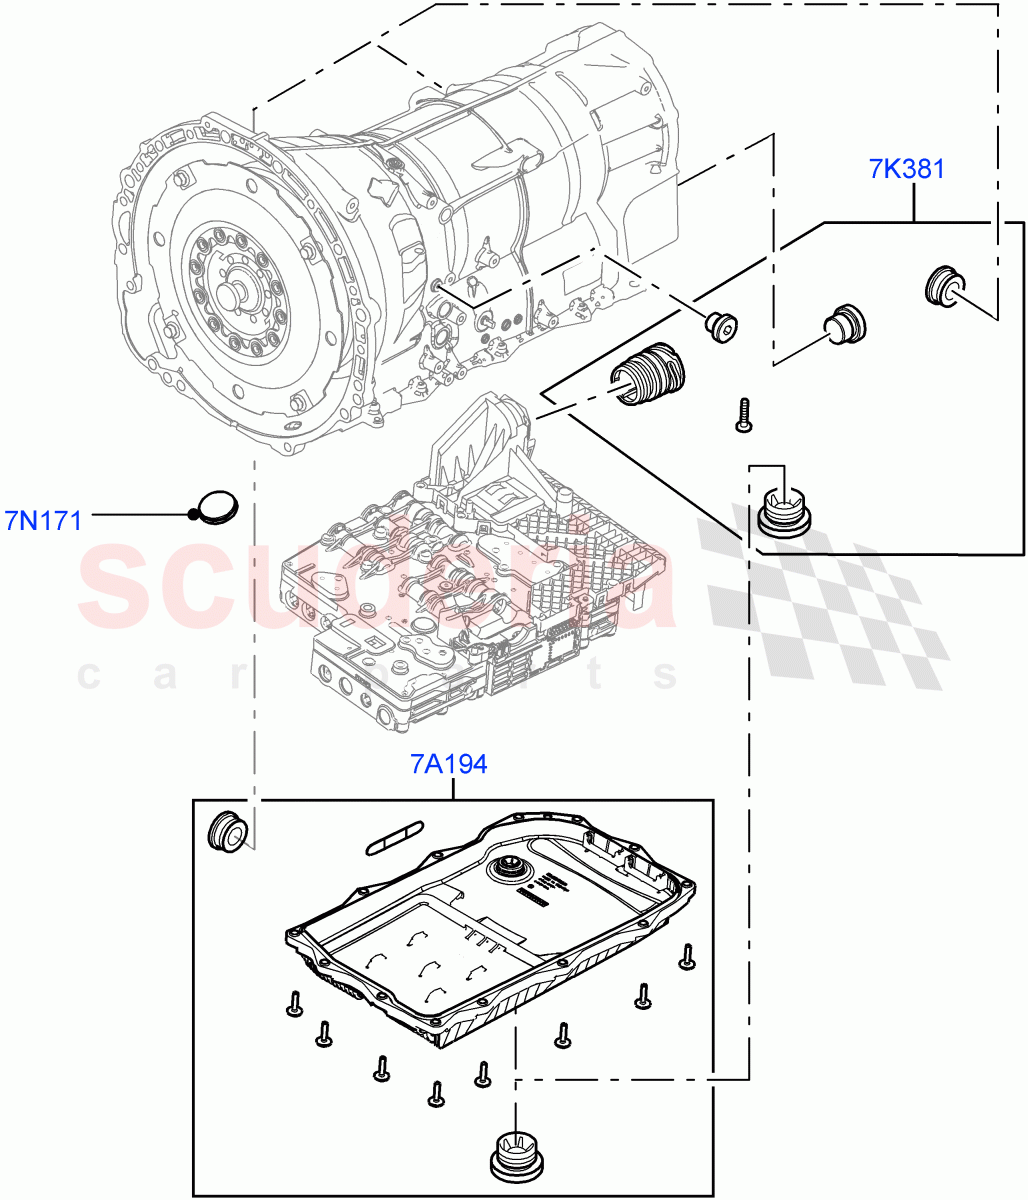 Transmission External Components(Solihull Plant Build)(2.0L I4 DSL HIGH DOHC AJ200,8 Speed Auto Trans ZF 8HP70 4WD)((V)FROMHA000001) of Land Rover Land Rover Discovery 5 (2017+) [3.0 I6 Turbo Petrol AJ20P6]